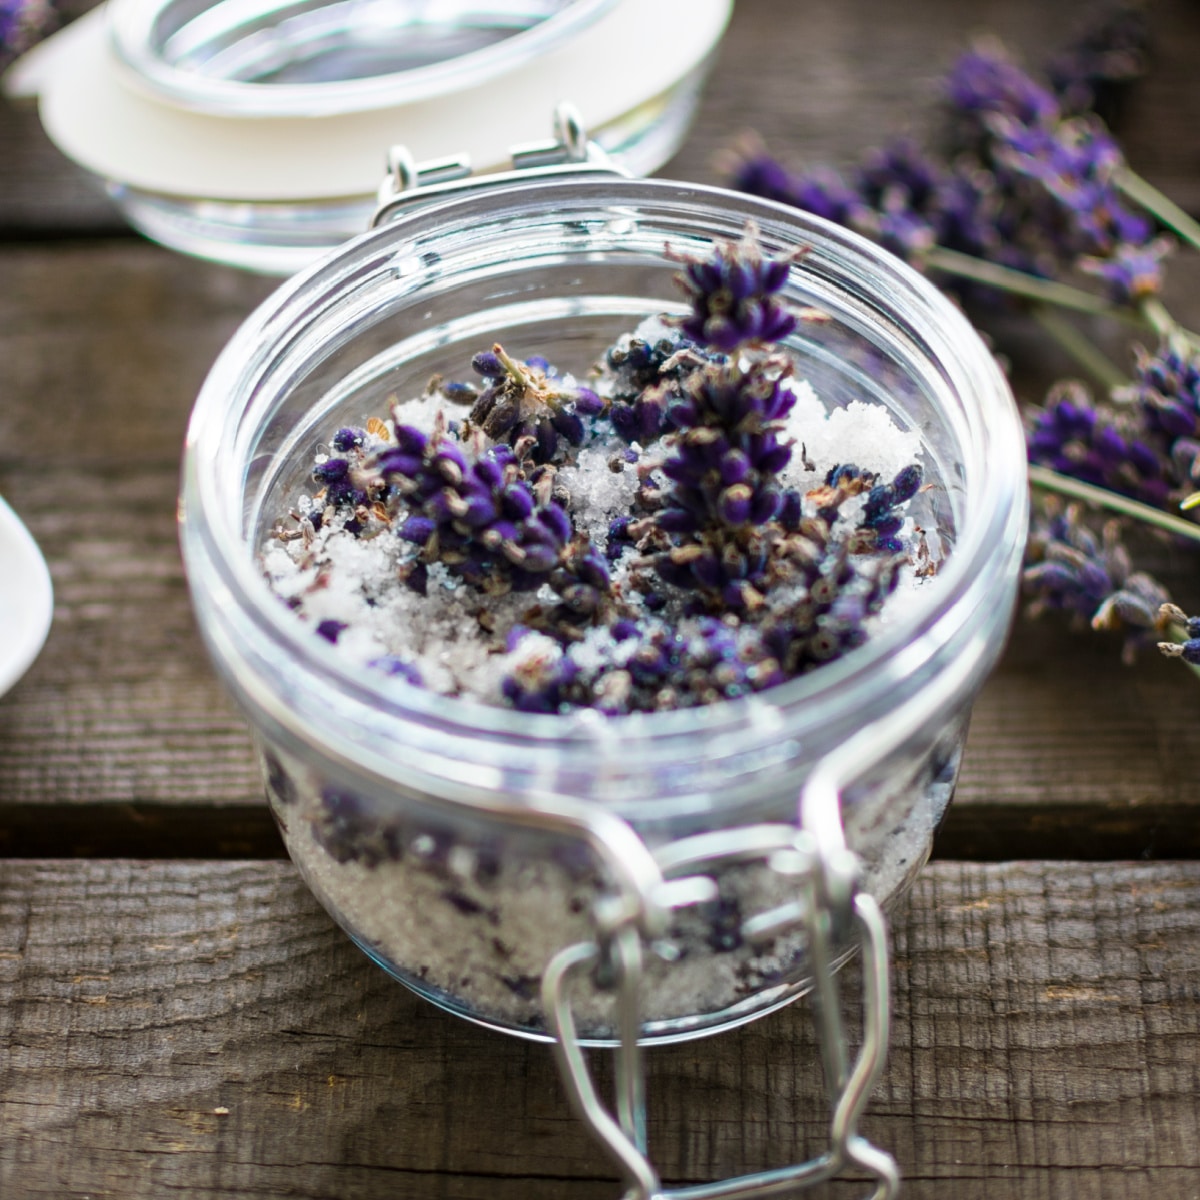 Small jar of bath salts with lavender buds.